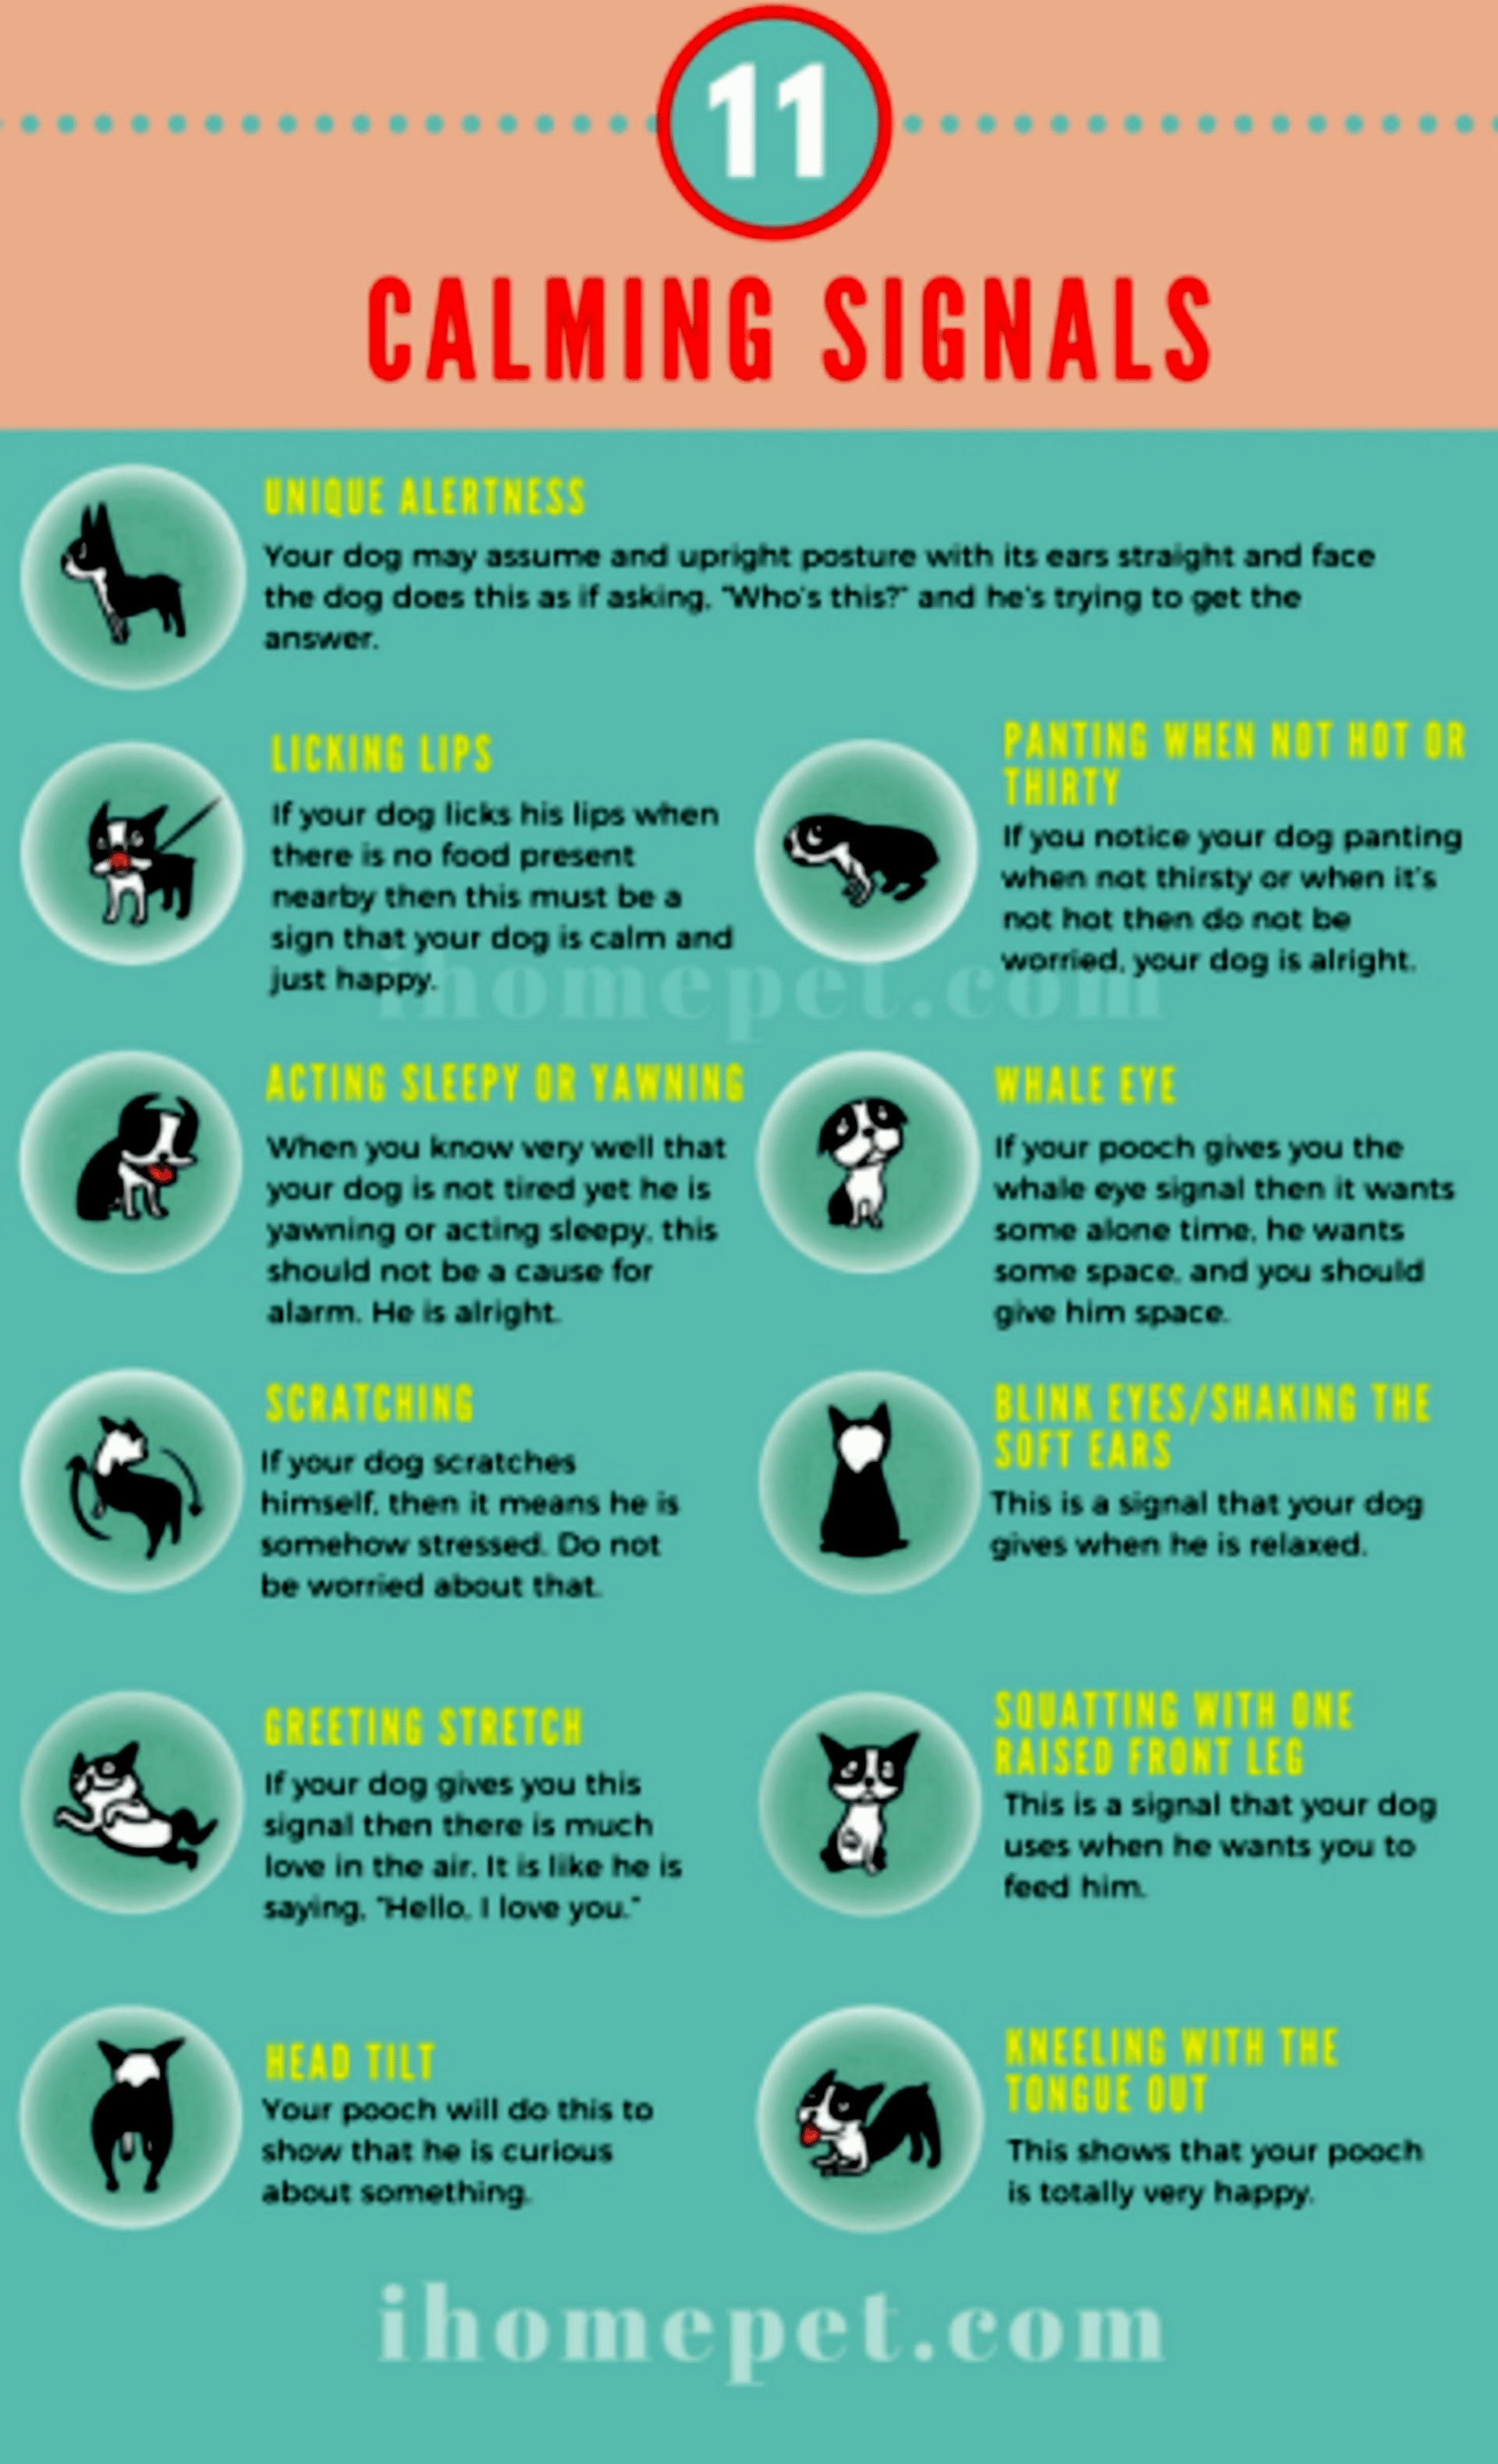 Belly rub is a self calm sign that your dog sees no fear